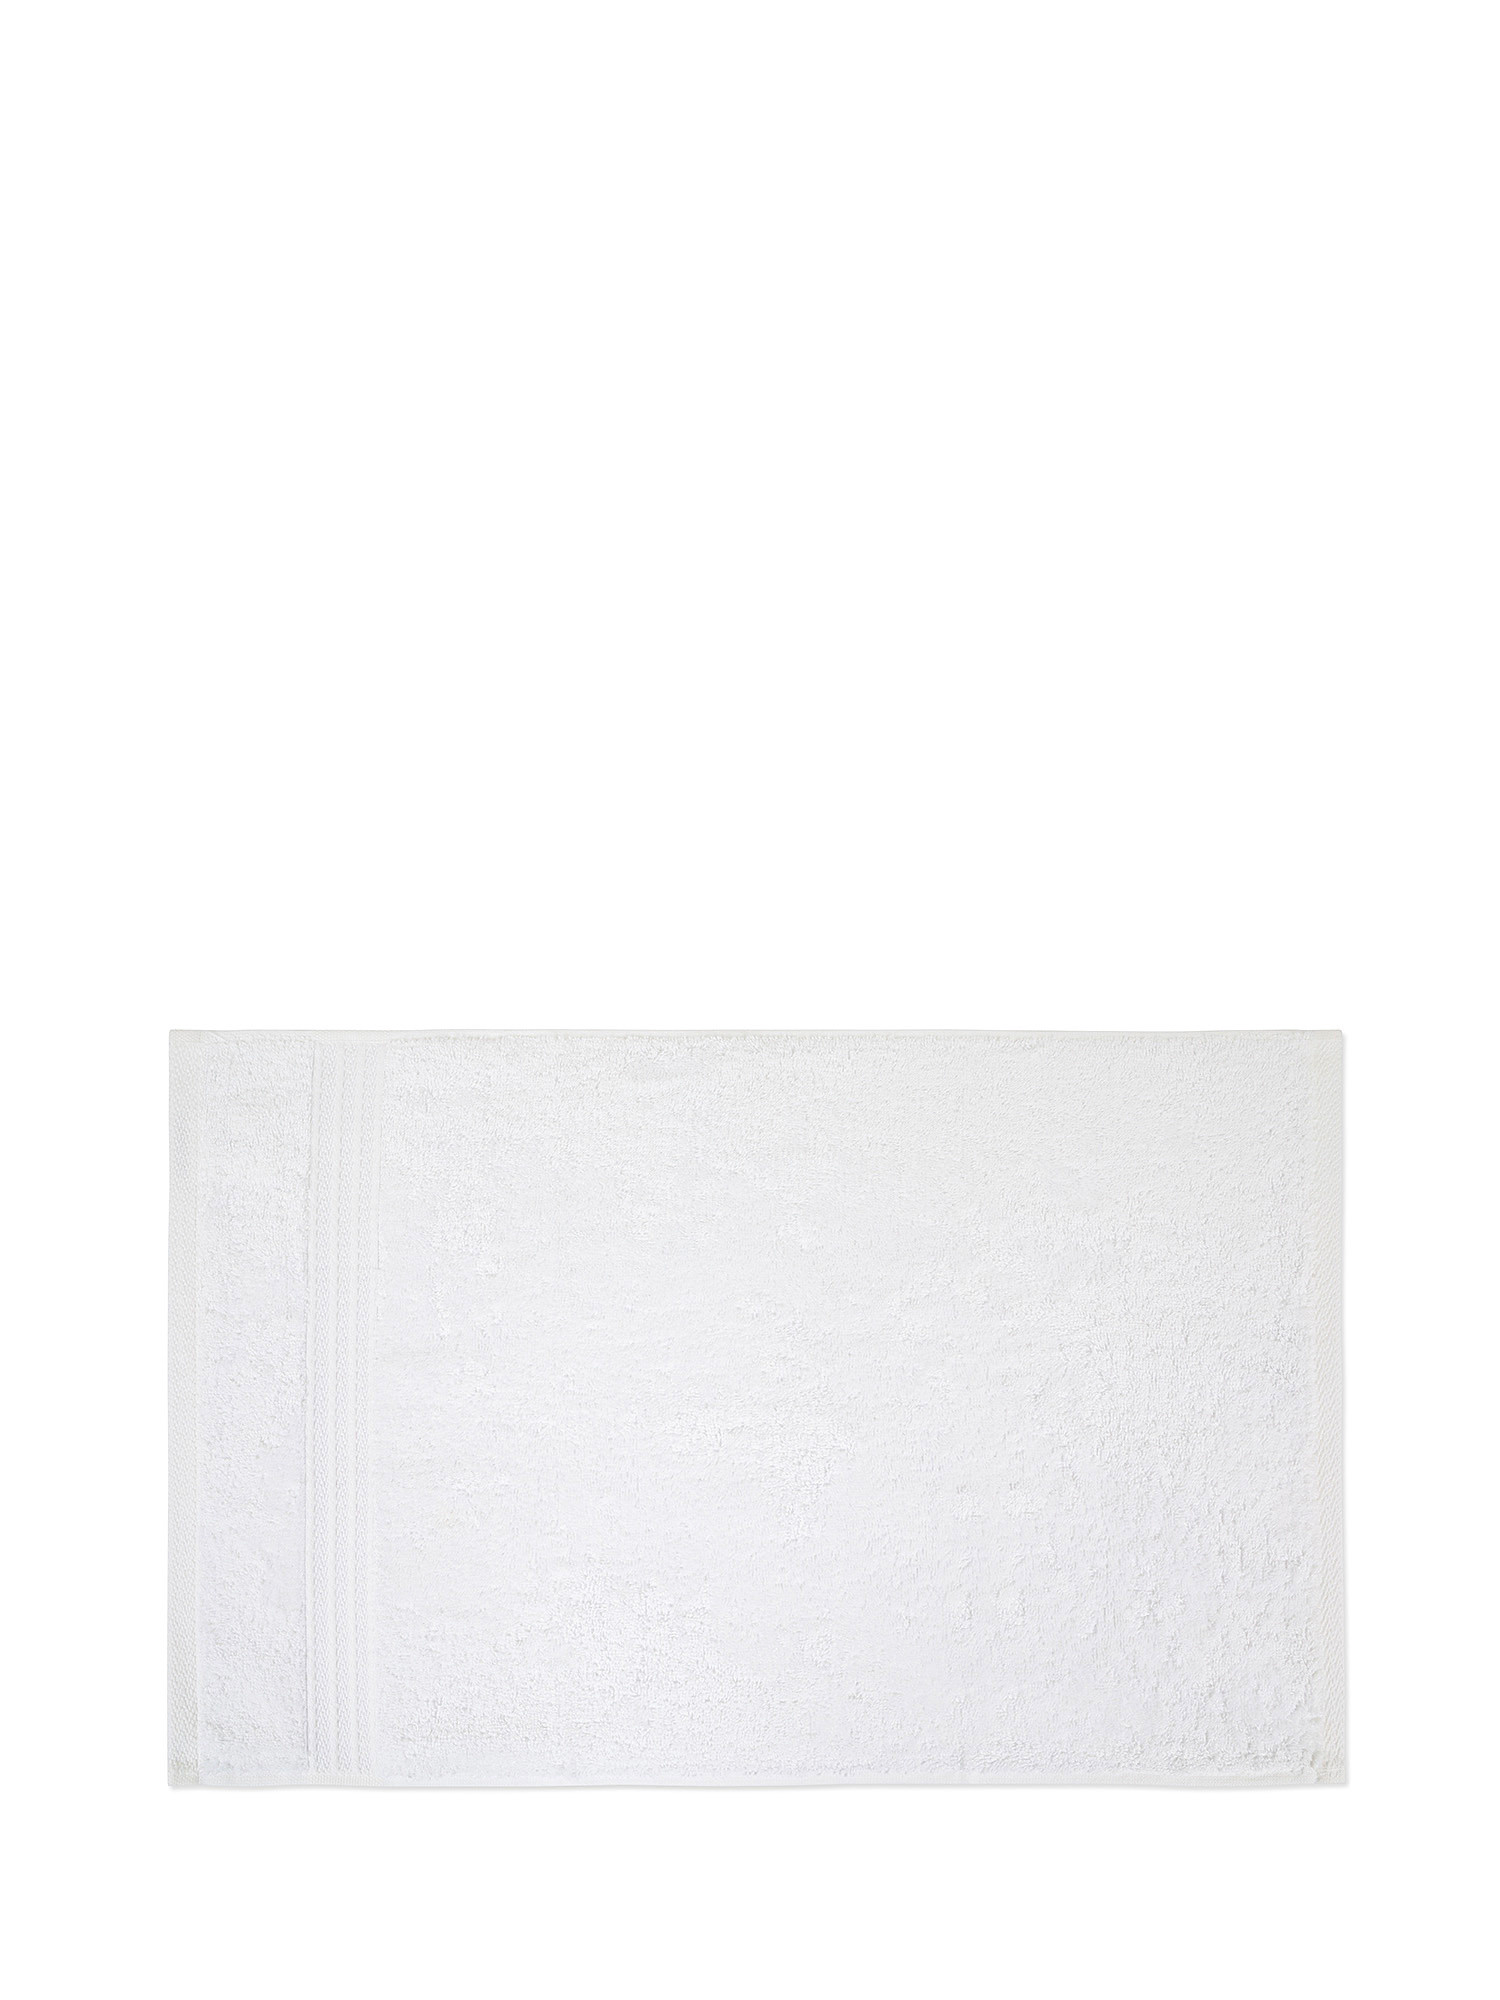 Zefiro solid color 100% cotton towel, White, large image number 1